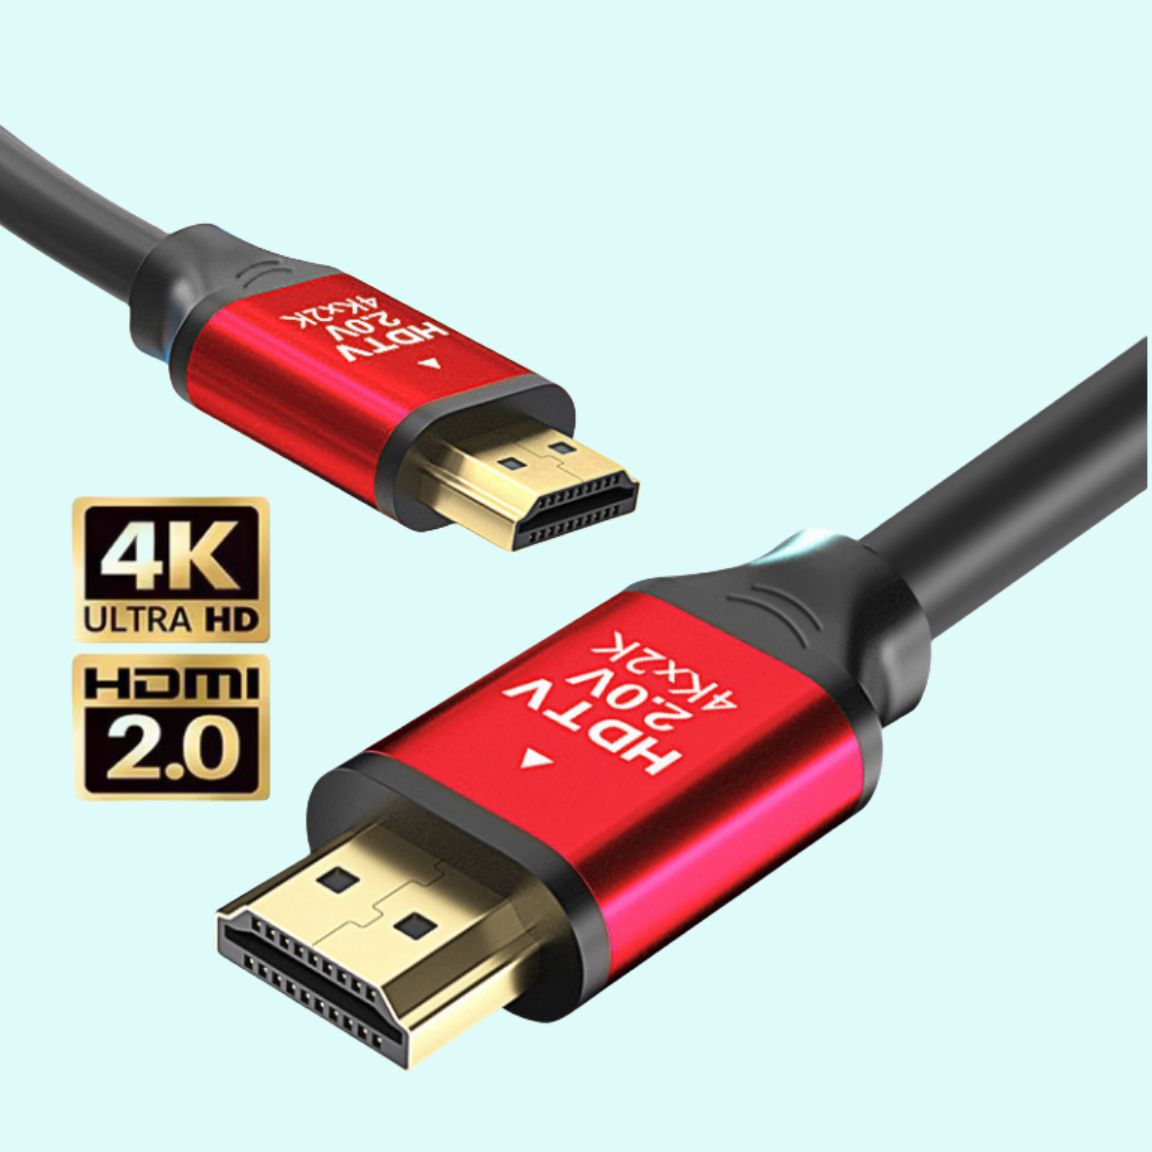 HDMI 2.0 4k Cable Braided HDMI Cable Aluminum Connector